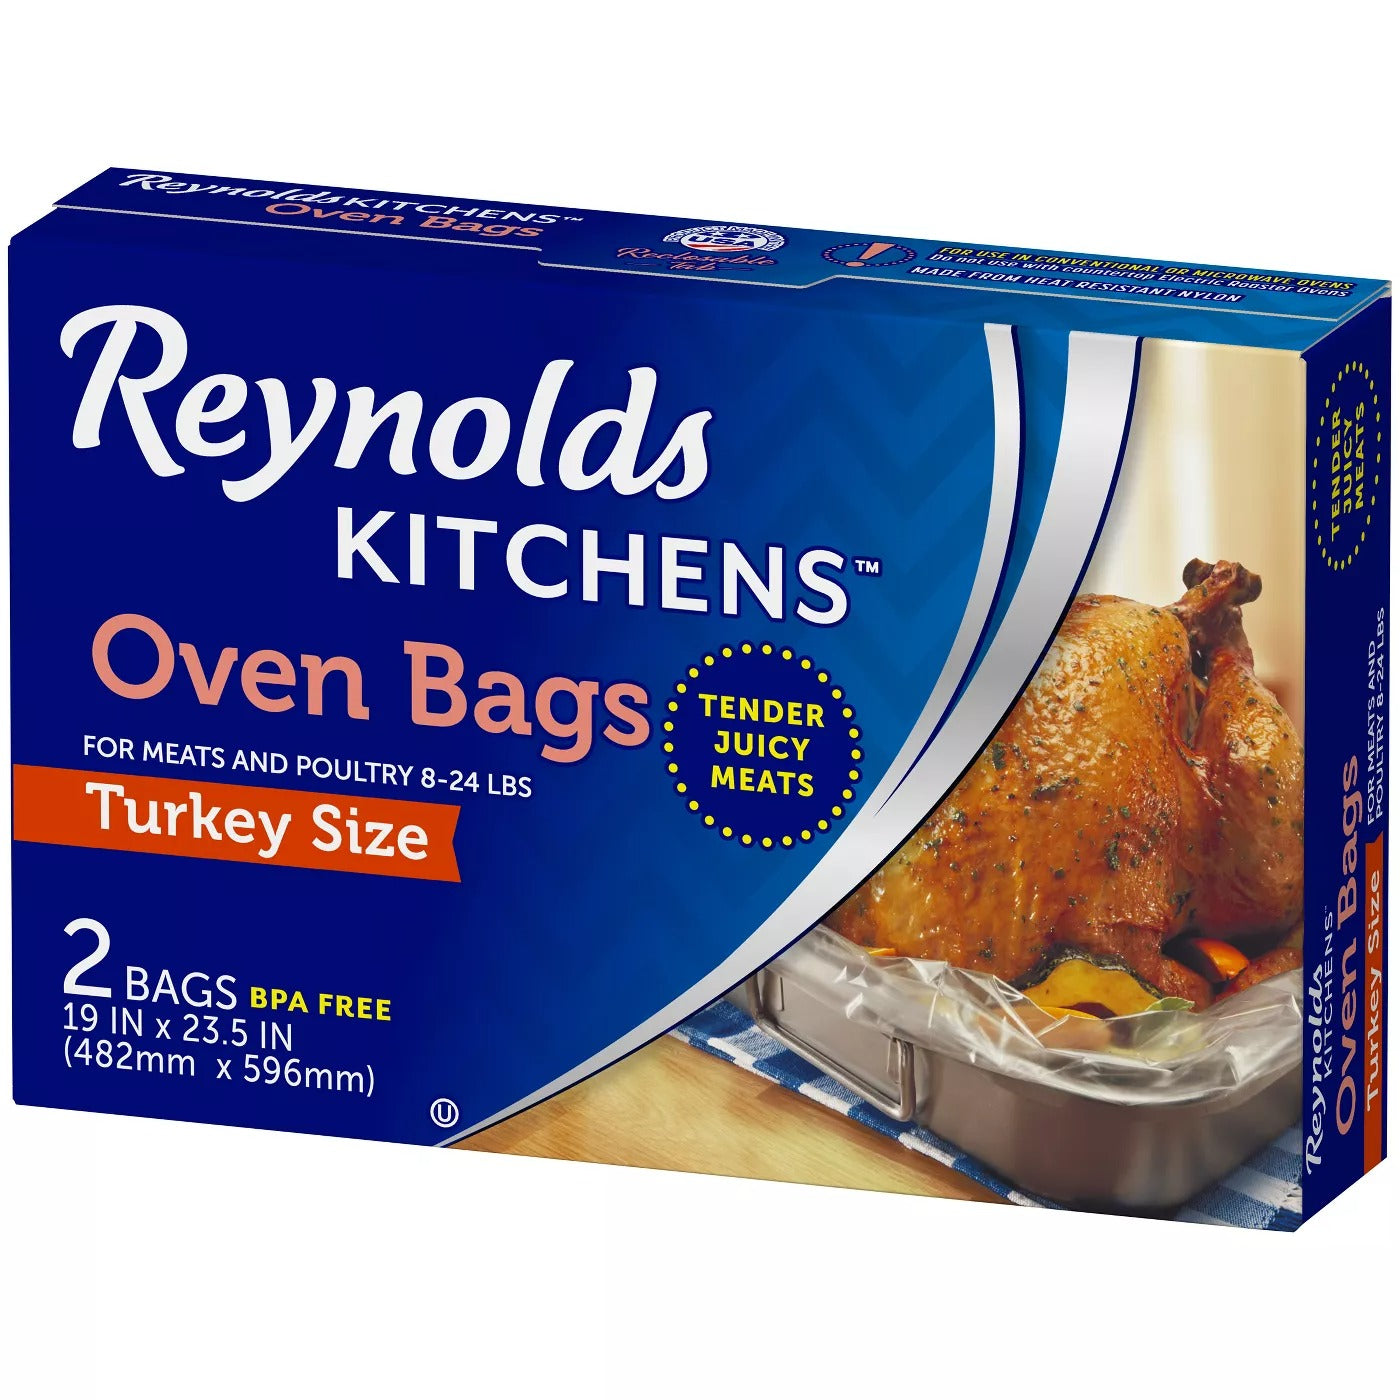 Cooking in an Oven Bag: What You Need to Know